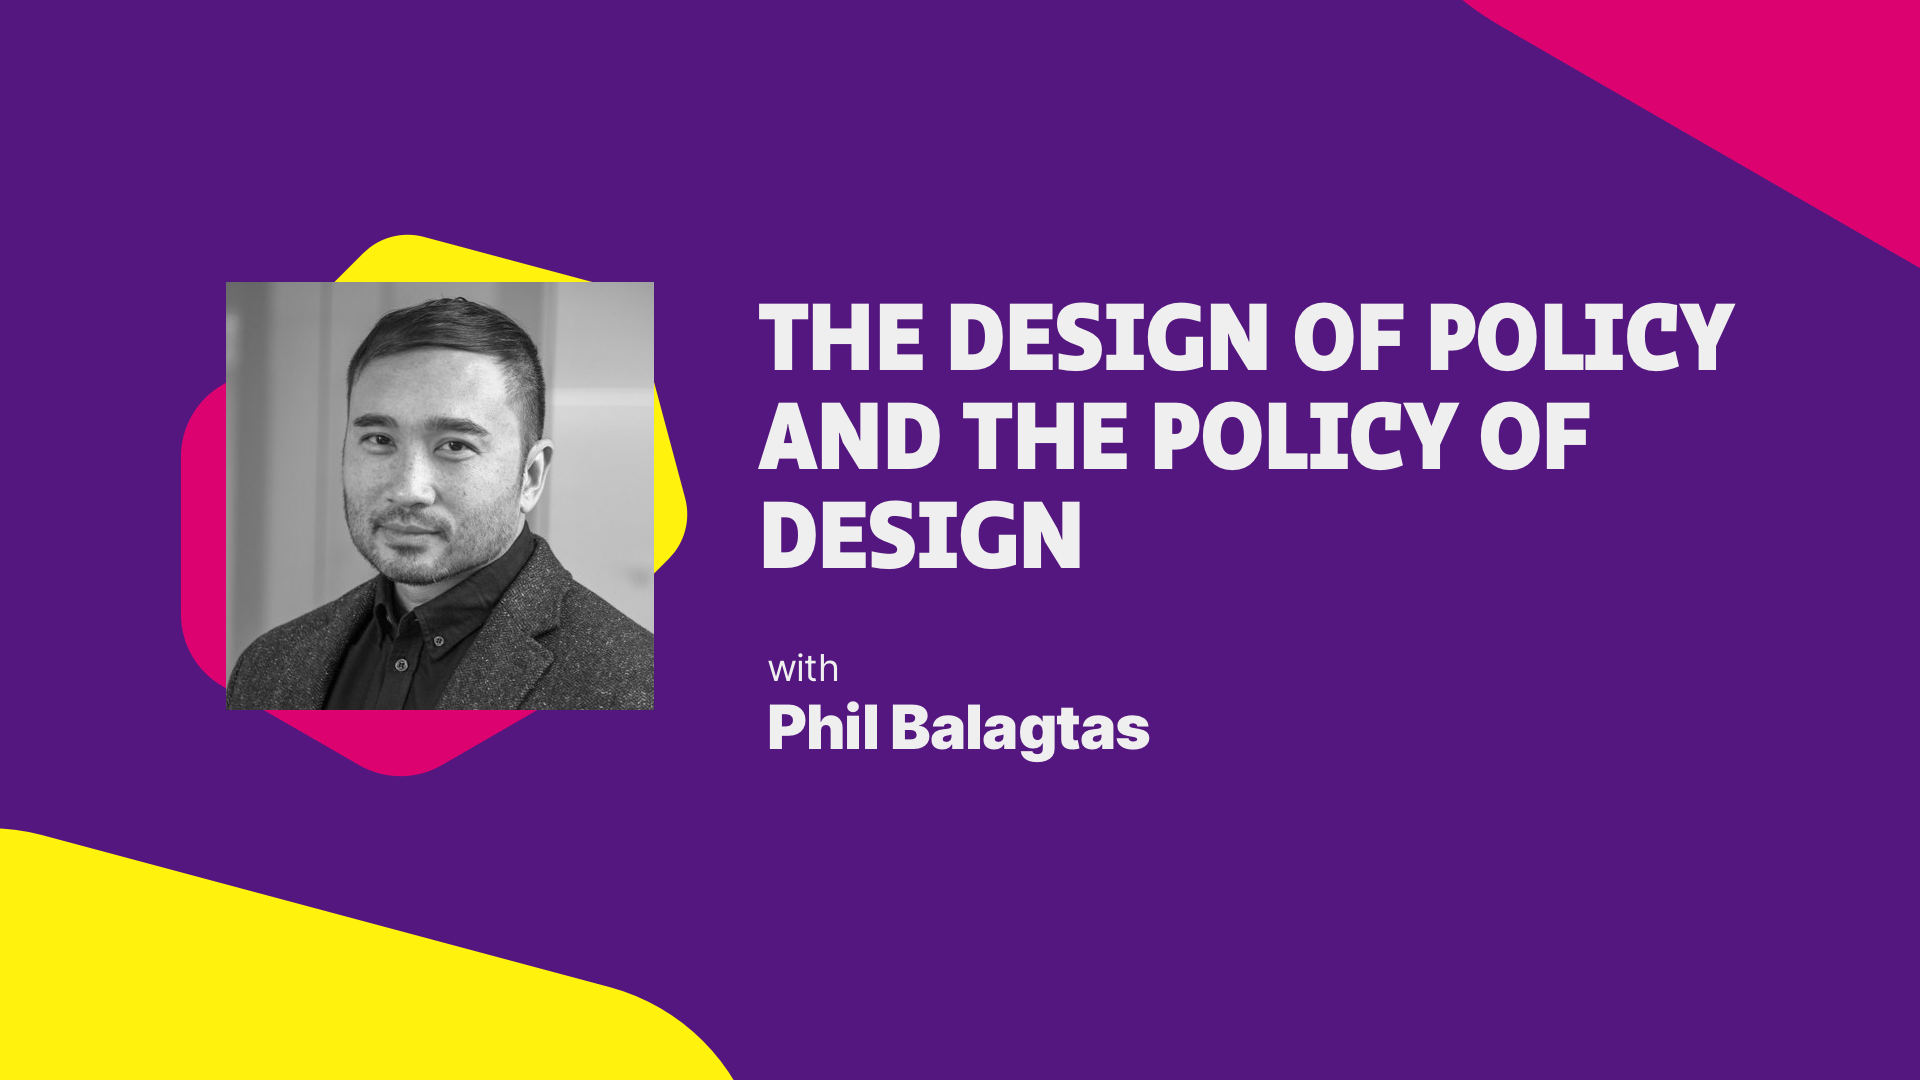 The Design of Policy and the Policy of Design